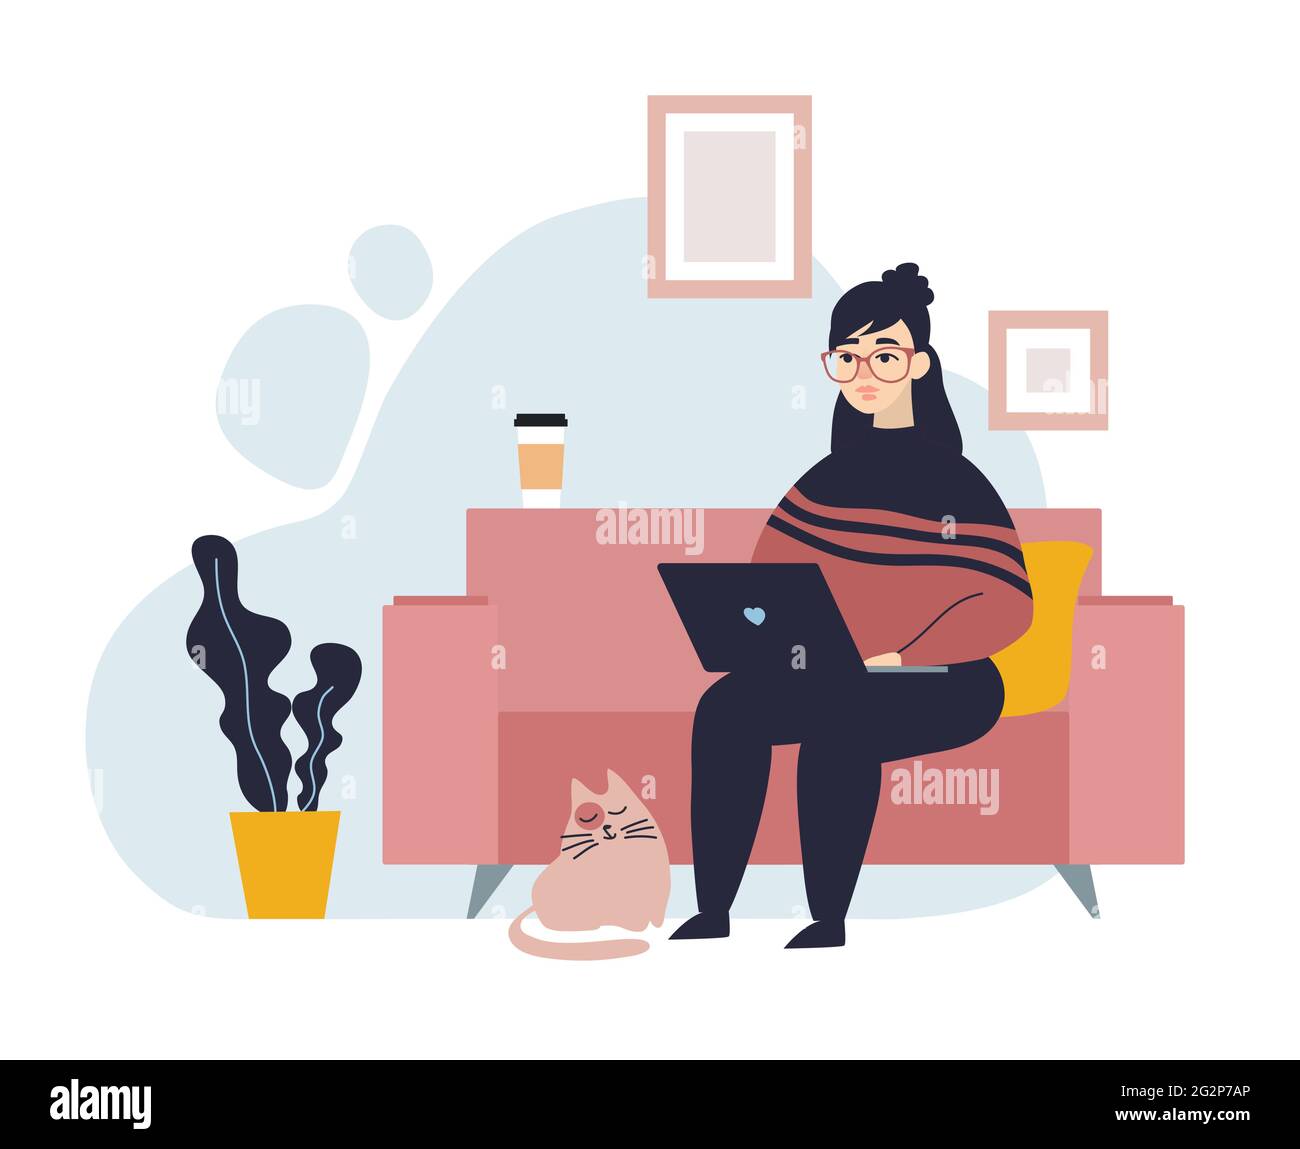 Stay home concept. Girl in glasses work on laptop at home. Coronavirus Covid-19 outbreak. Freelancer keeps social distancing. Trendy flat vector illus Stock Vector